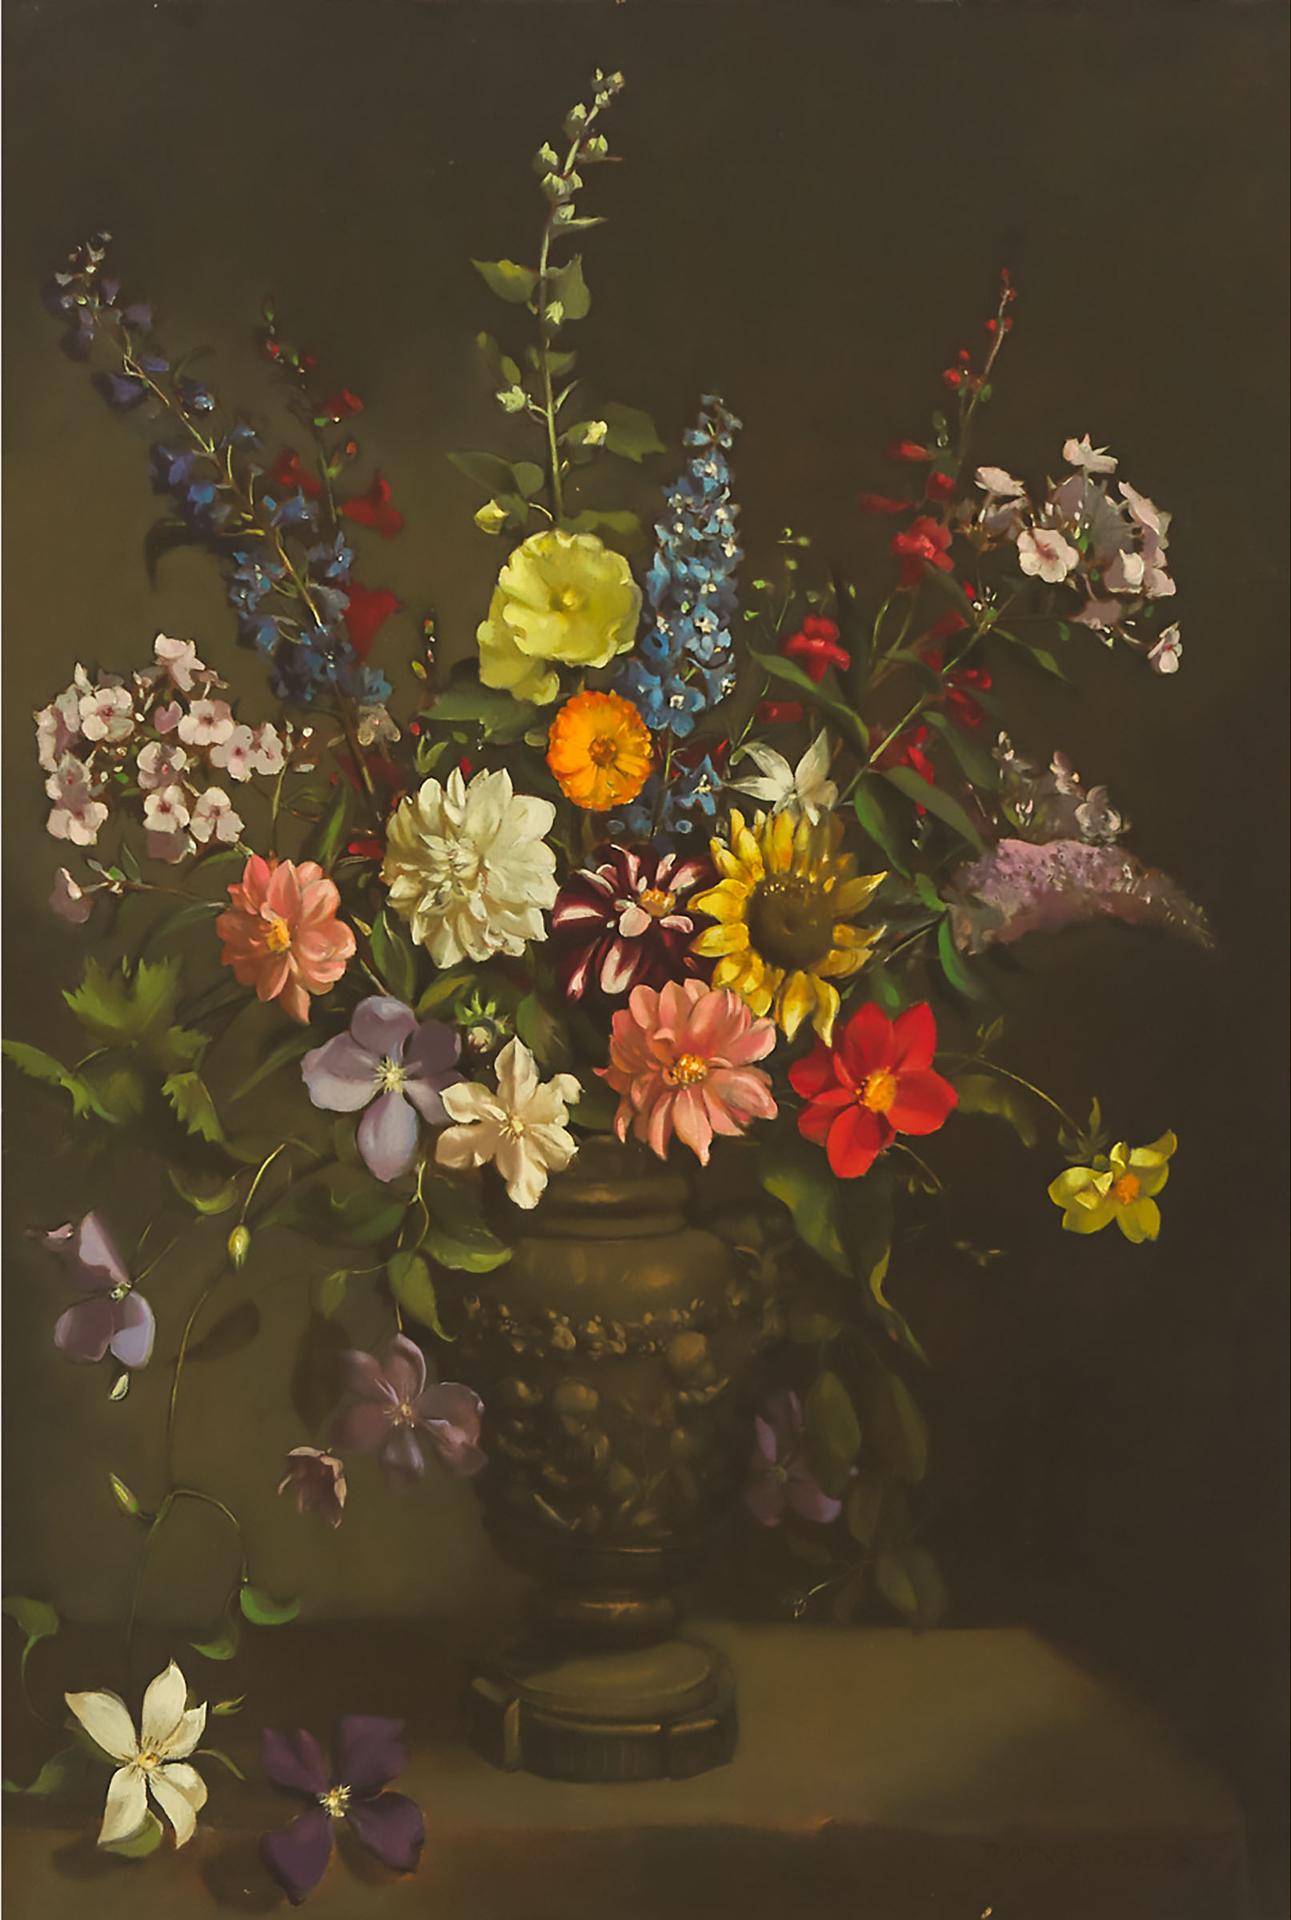 Terence Loudon - Flowers In A Vase